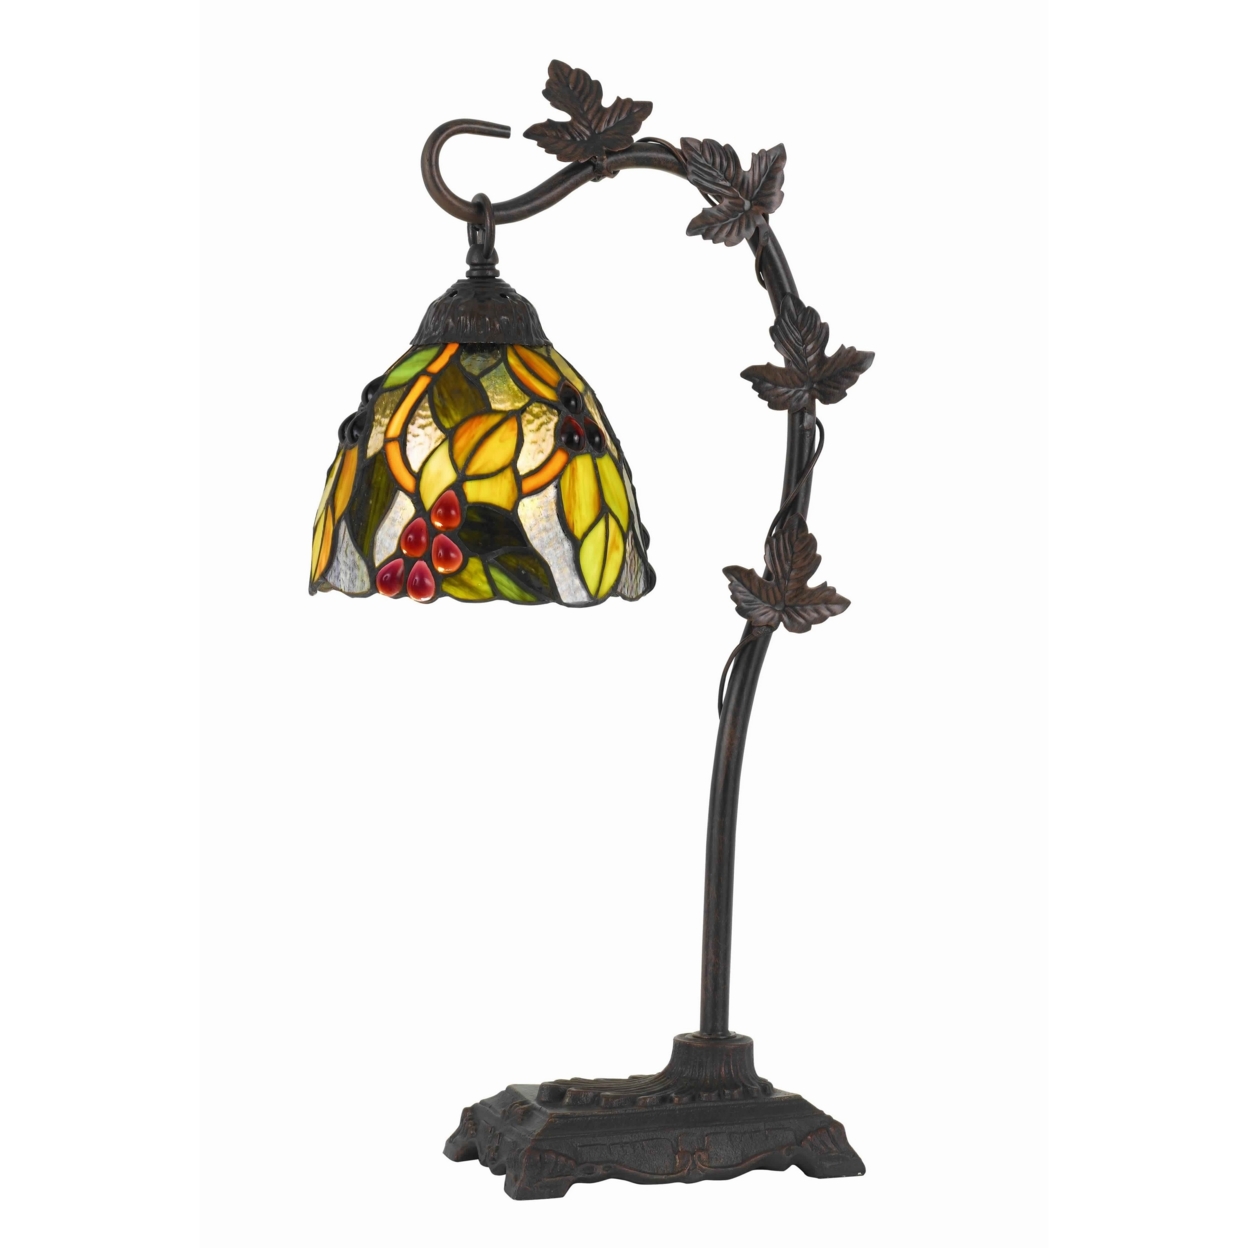 Hand Painted Table Lamp With Intricate Leaf Design Arched Base, Multicolor- Saltoro Sherpi